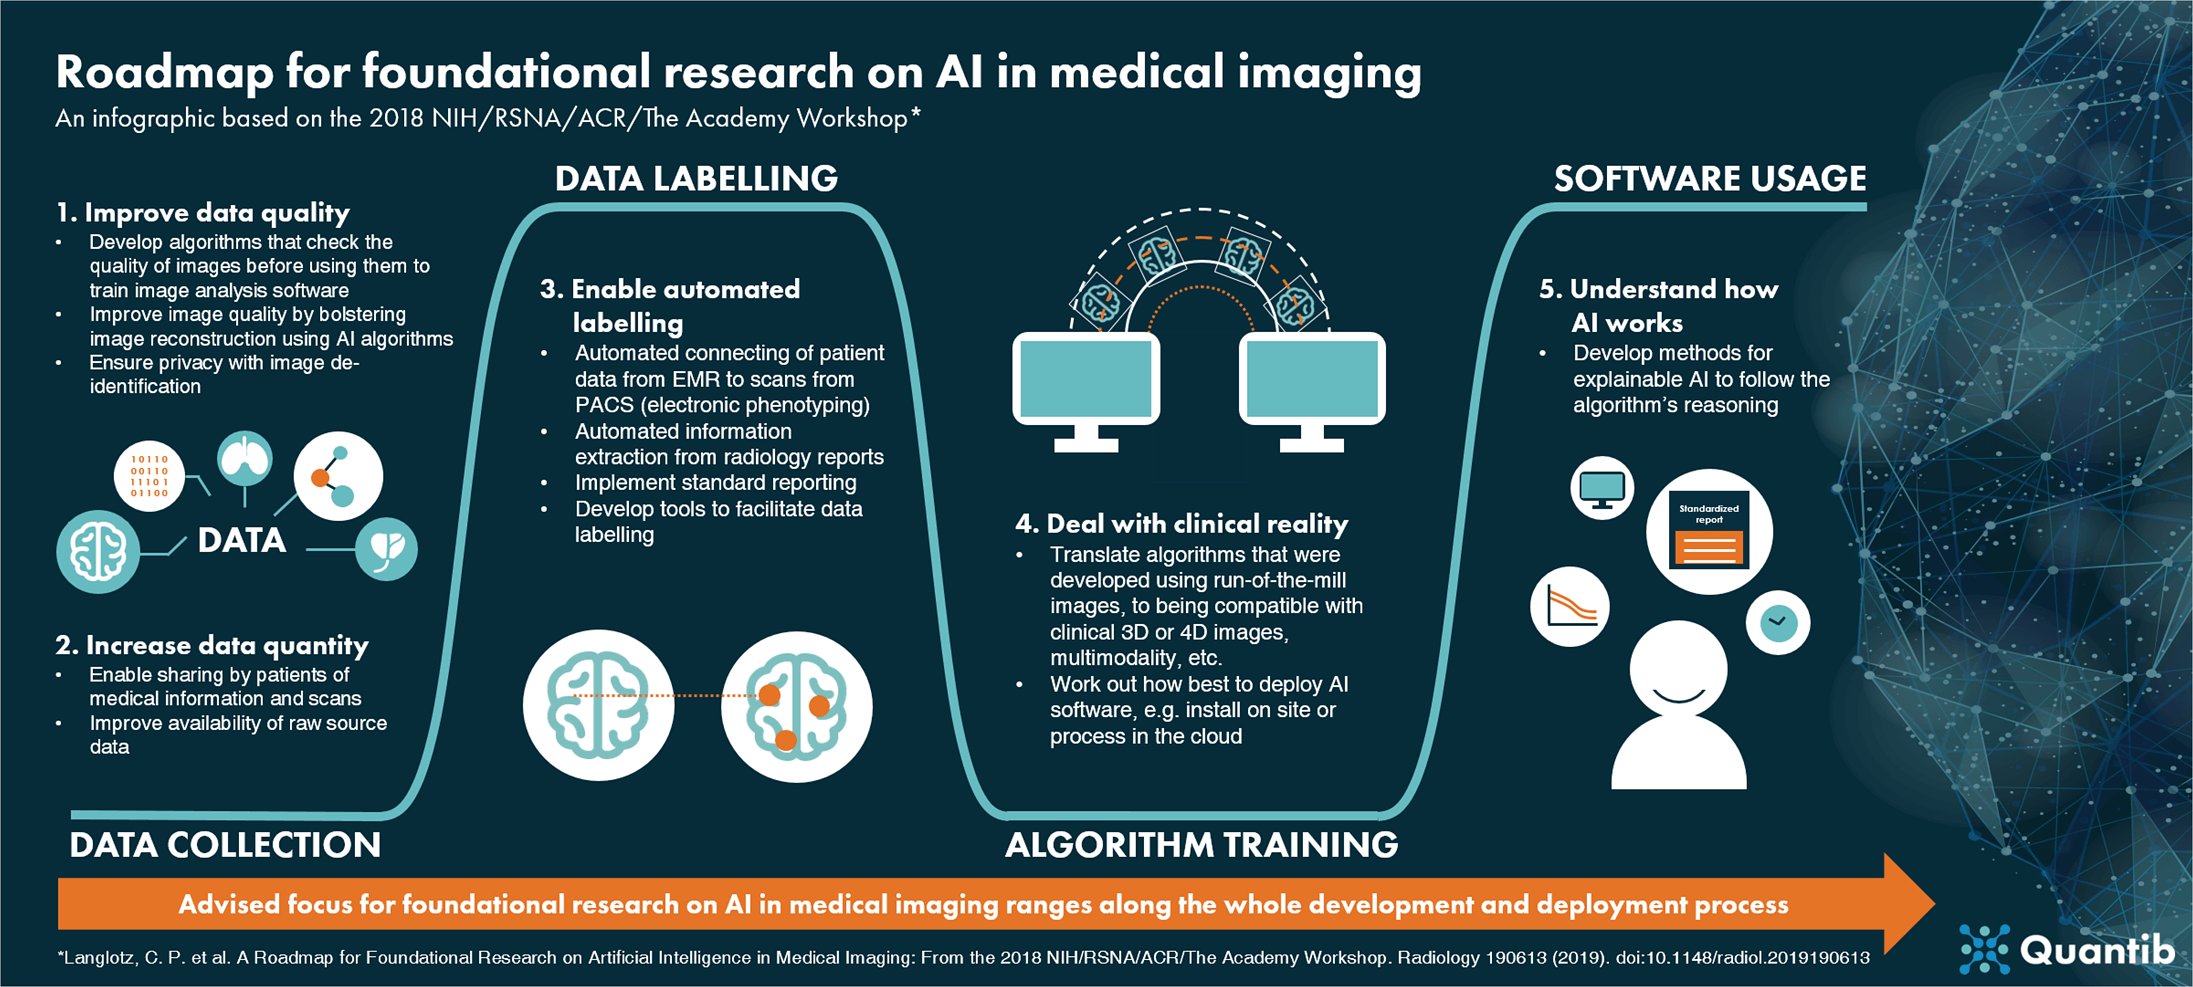 190426   Infographic   Roadmap To AI In Medical Imaging (1) ?width=3634&name=190426   Infographic   Roadmap To AI In Medical Imaging (1) 